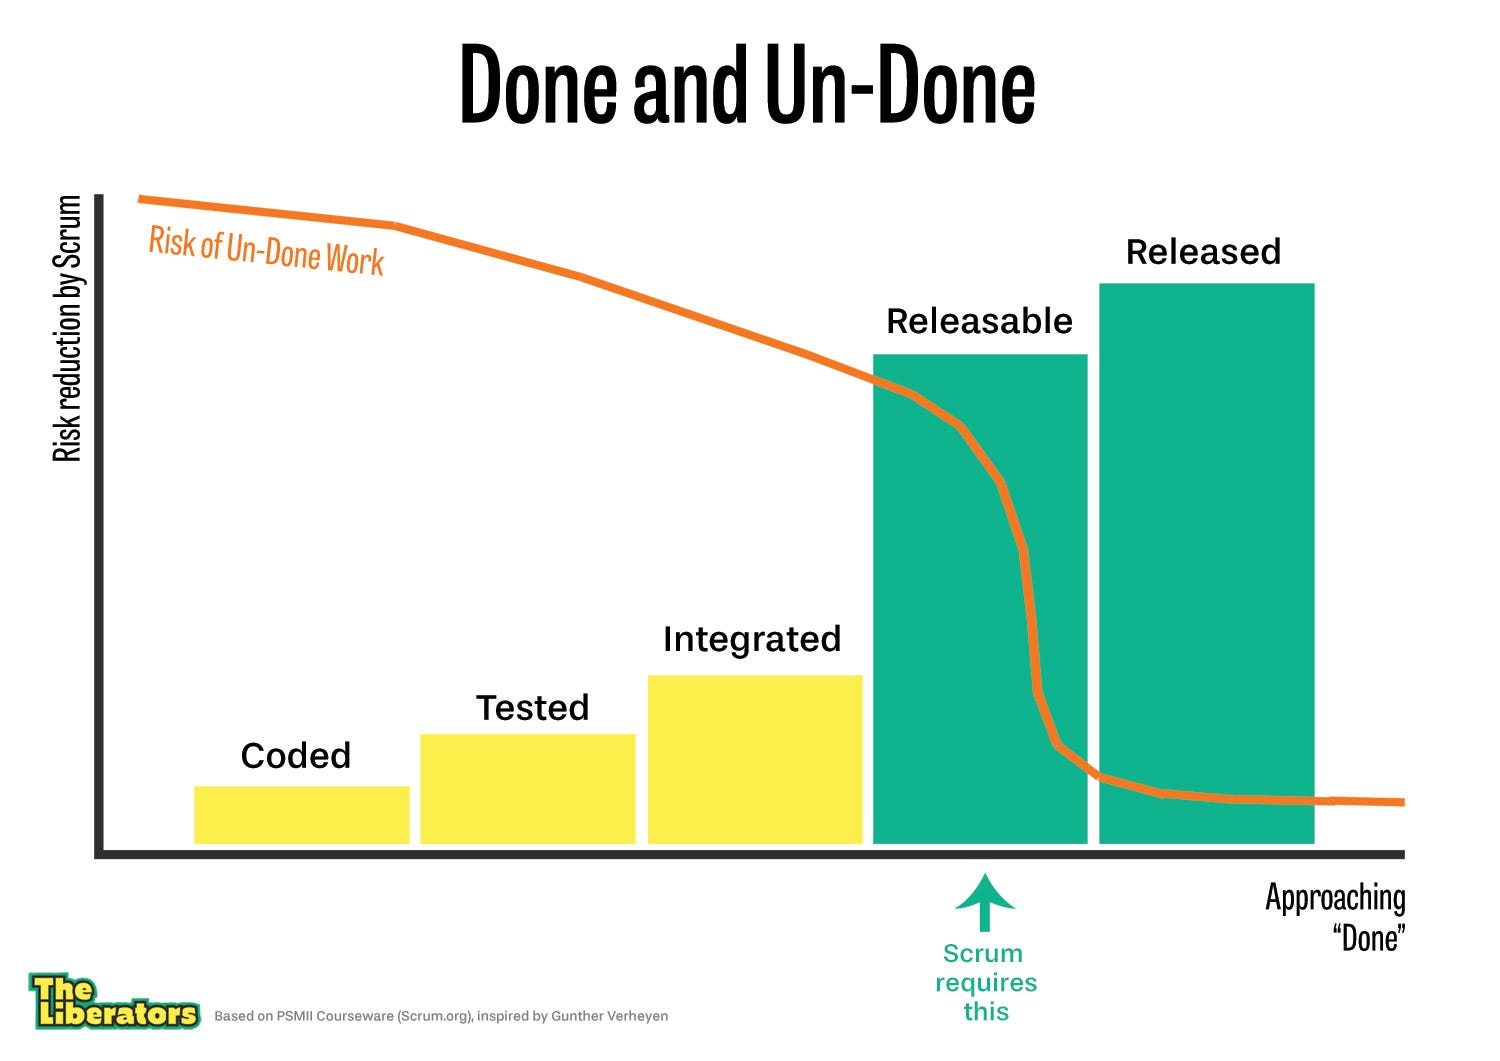 Why Scrum requires completely “Done” software every Sprint